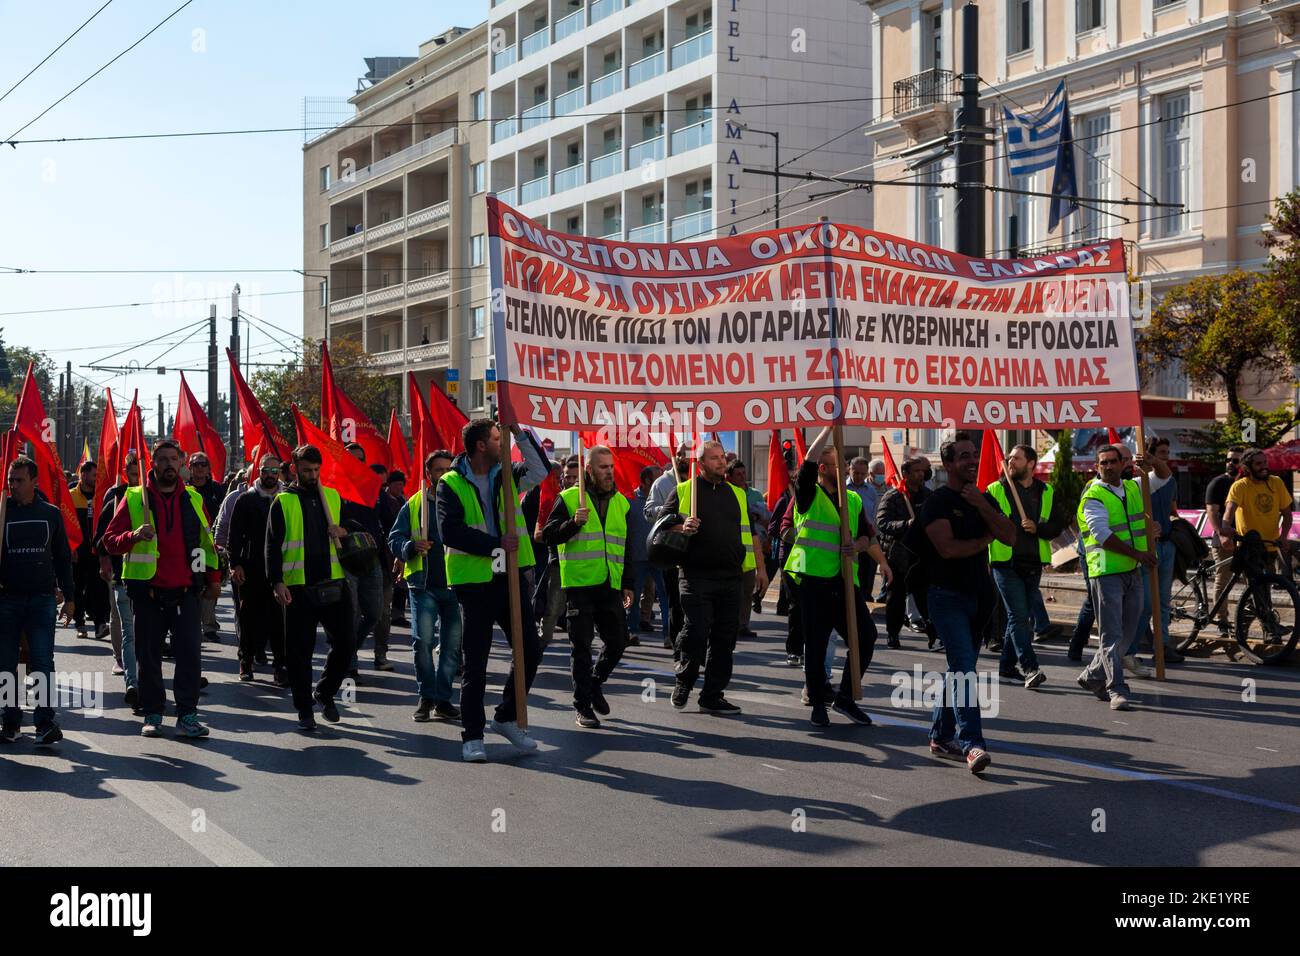 Demonstration of labor unions during a general strike against the excessive cost of living, the high cost of energy, inflation and austerity. Stock Photo